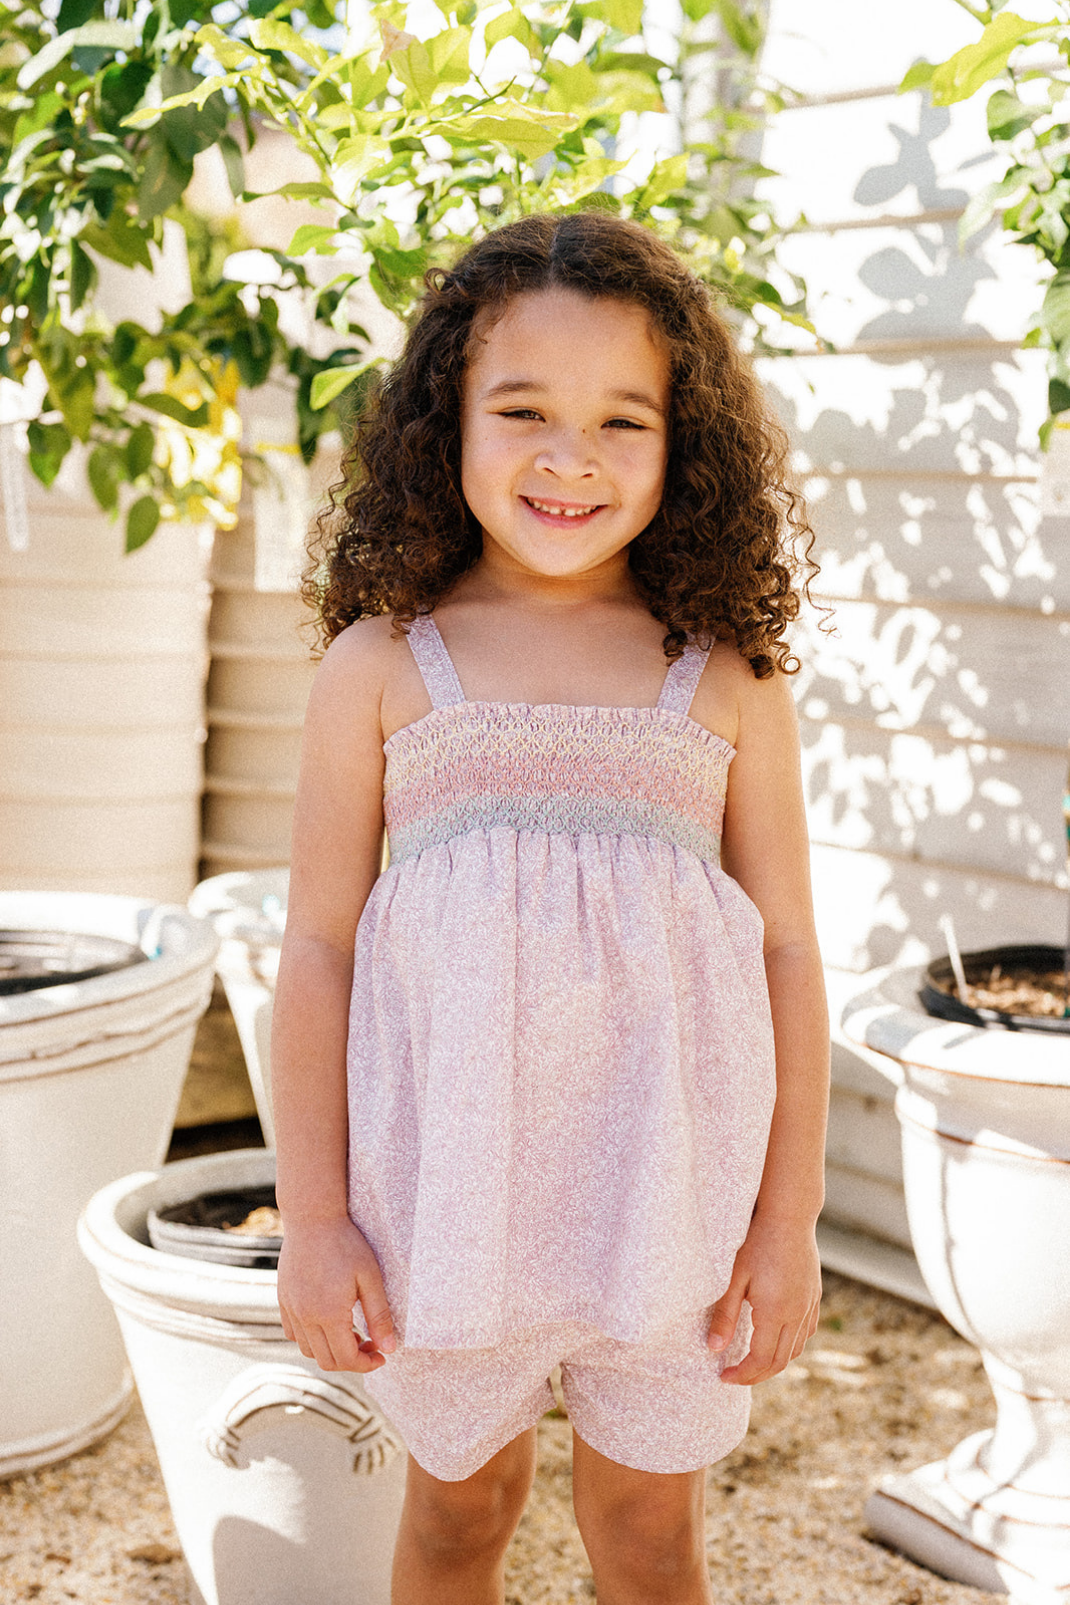 Lifestyle shot of a little girl wearing the Rosie Girls Set in Scattered Blooms